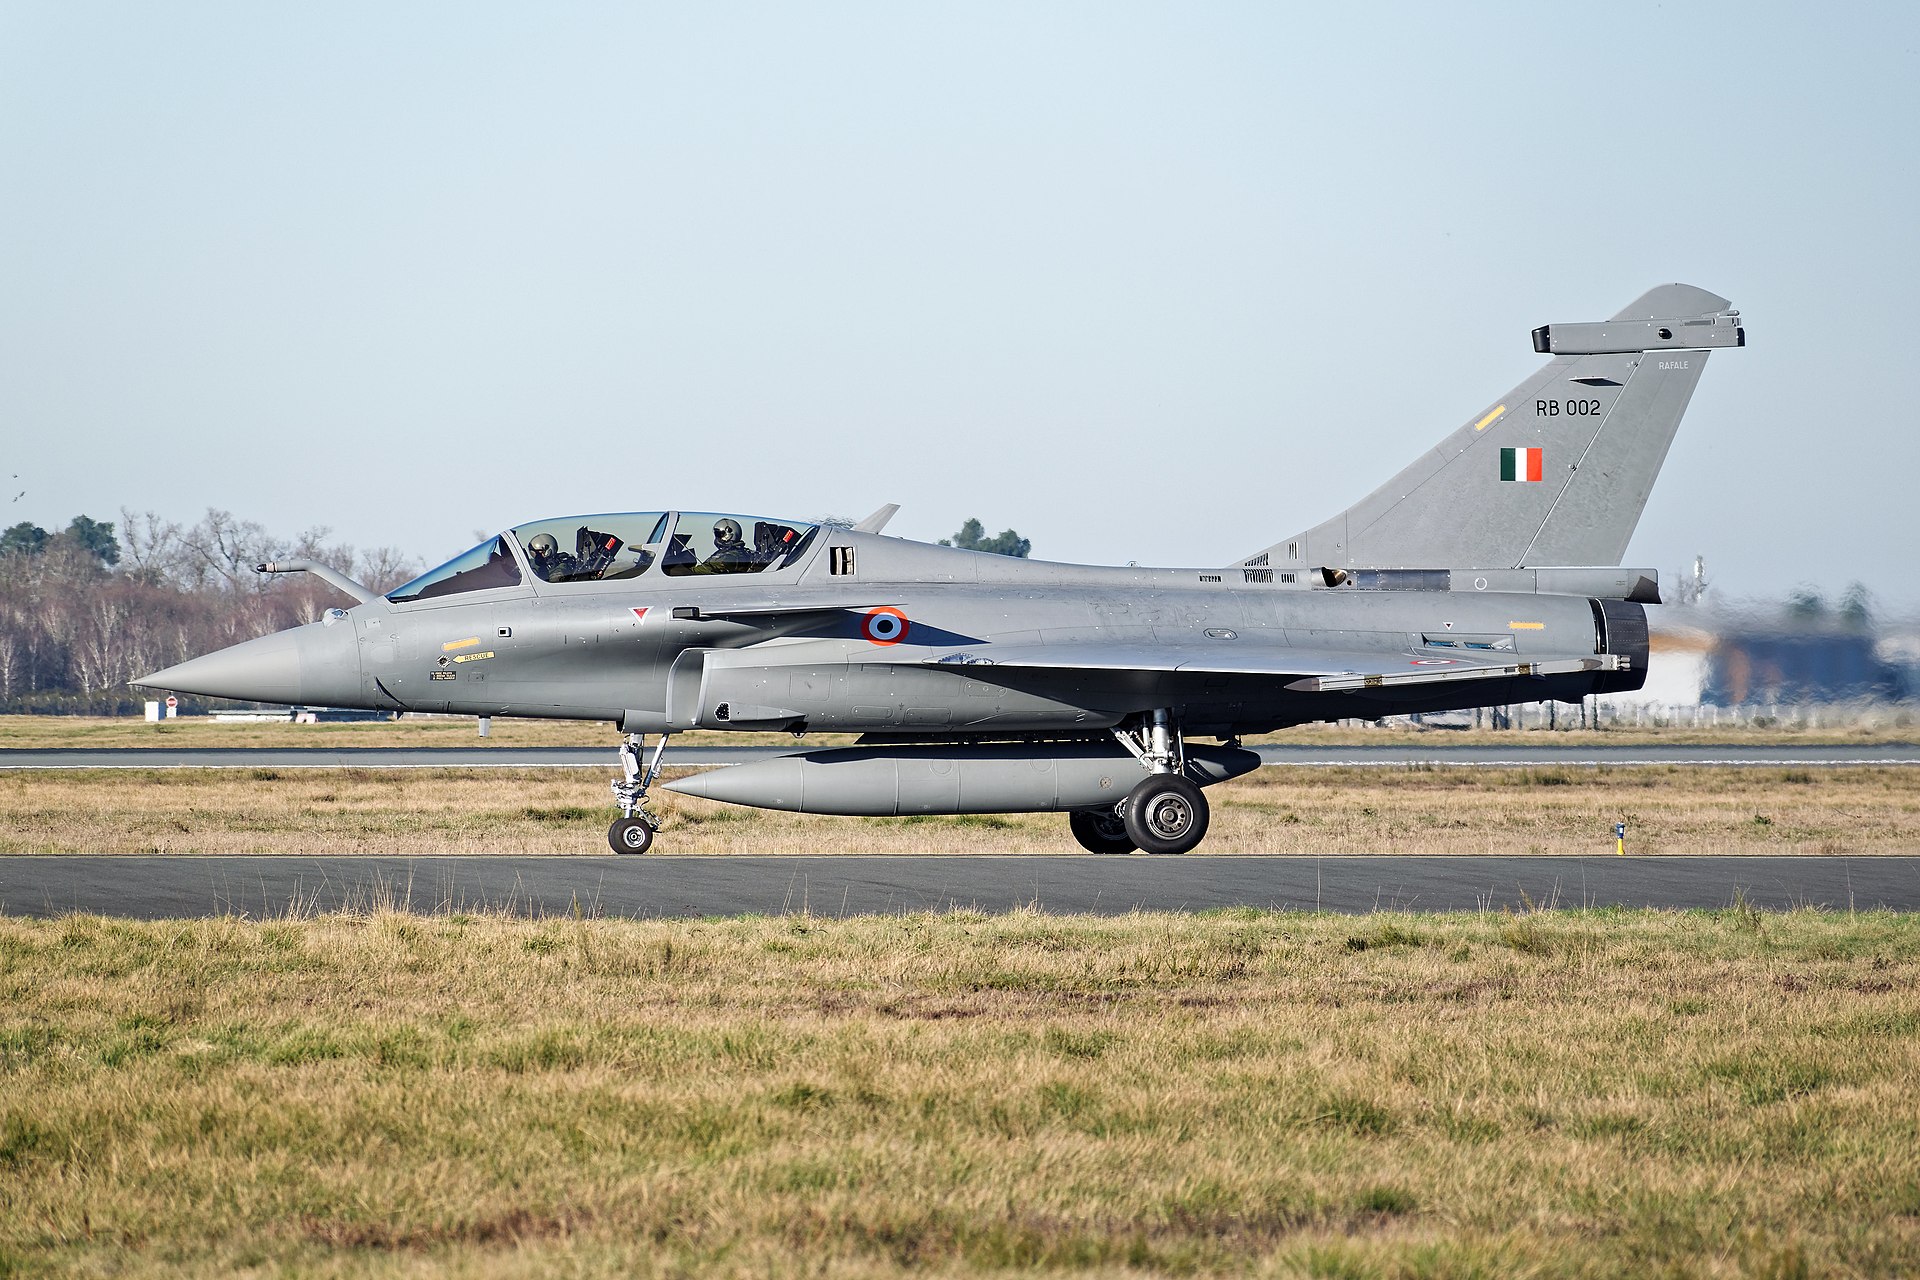 India-U.S. Air Exercise "Cope India" Starts Next Week; Japan To Observe